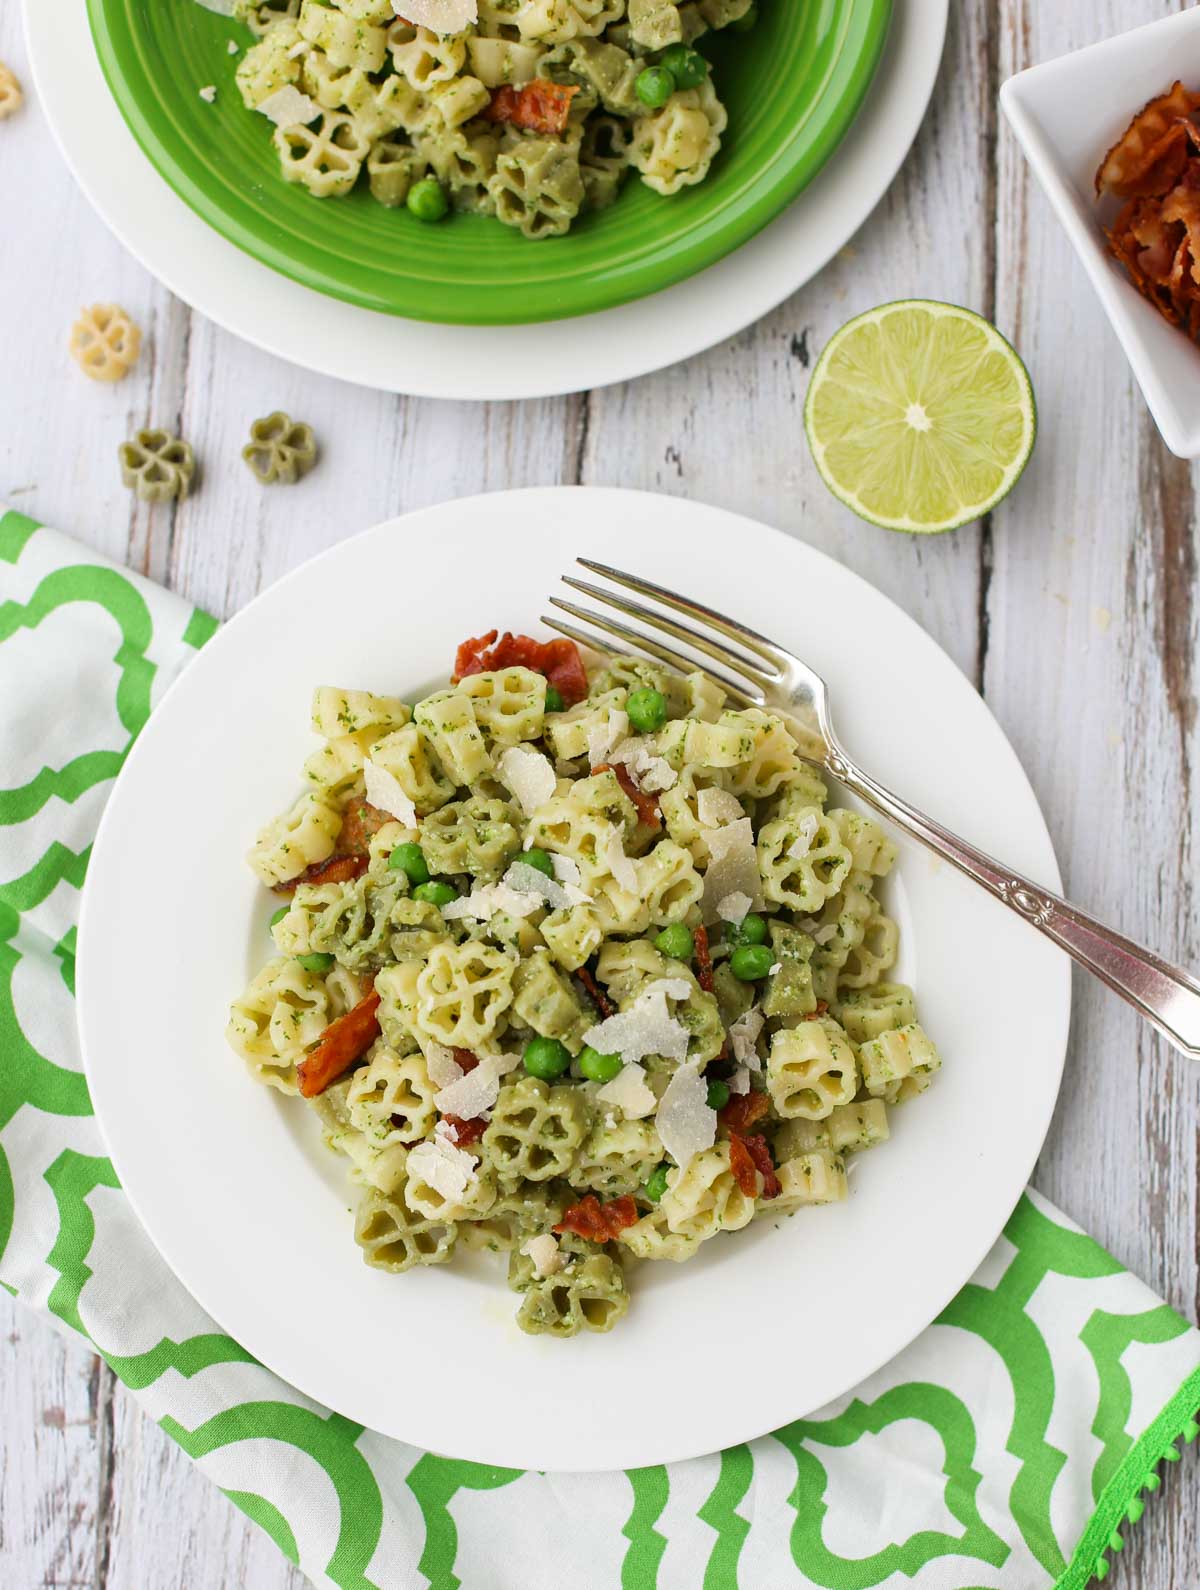 Arugula and Lime Pesto Pasta | A tangy and delicious combo for pesto! Add bacon, green peas, and make it your own! Yum! | WorldofPastabilities.com